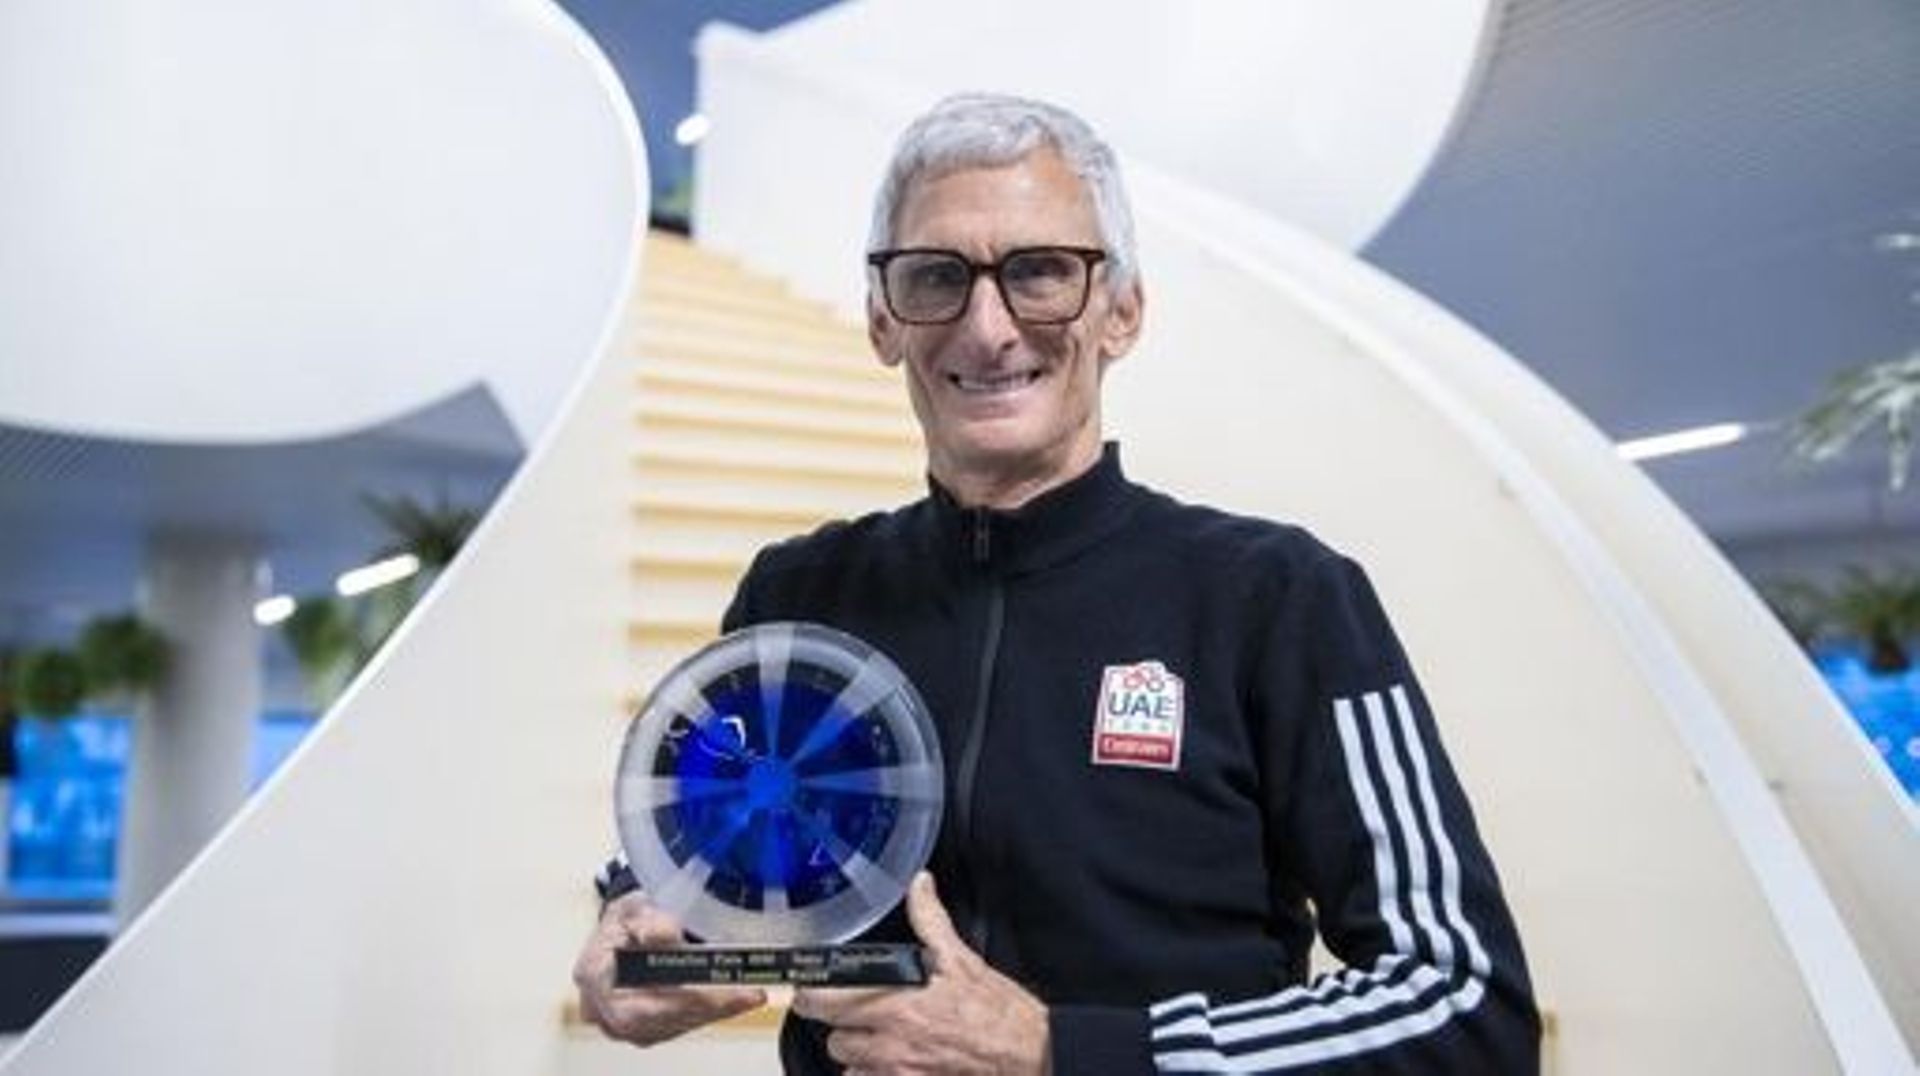 ATTENTION EDITORS - HAND OUT PICTURES - EDITORIAL USE ONLY - MANDATORY CREDIT DPG MEDIA  Hand out picture released on Monday 14 December 2020, by DPG Media shows UAE Team Emirates sports director Allan Peiper posing with the 'Beste Ploegleider' award (bes